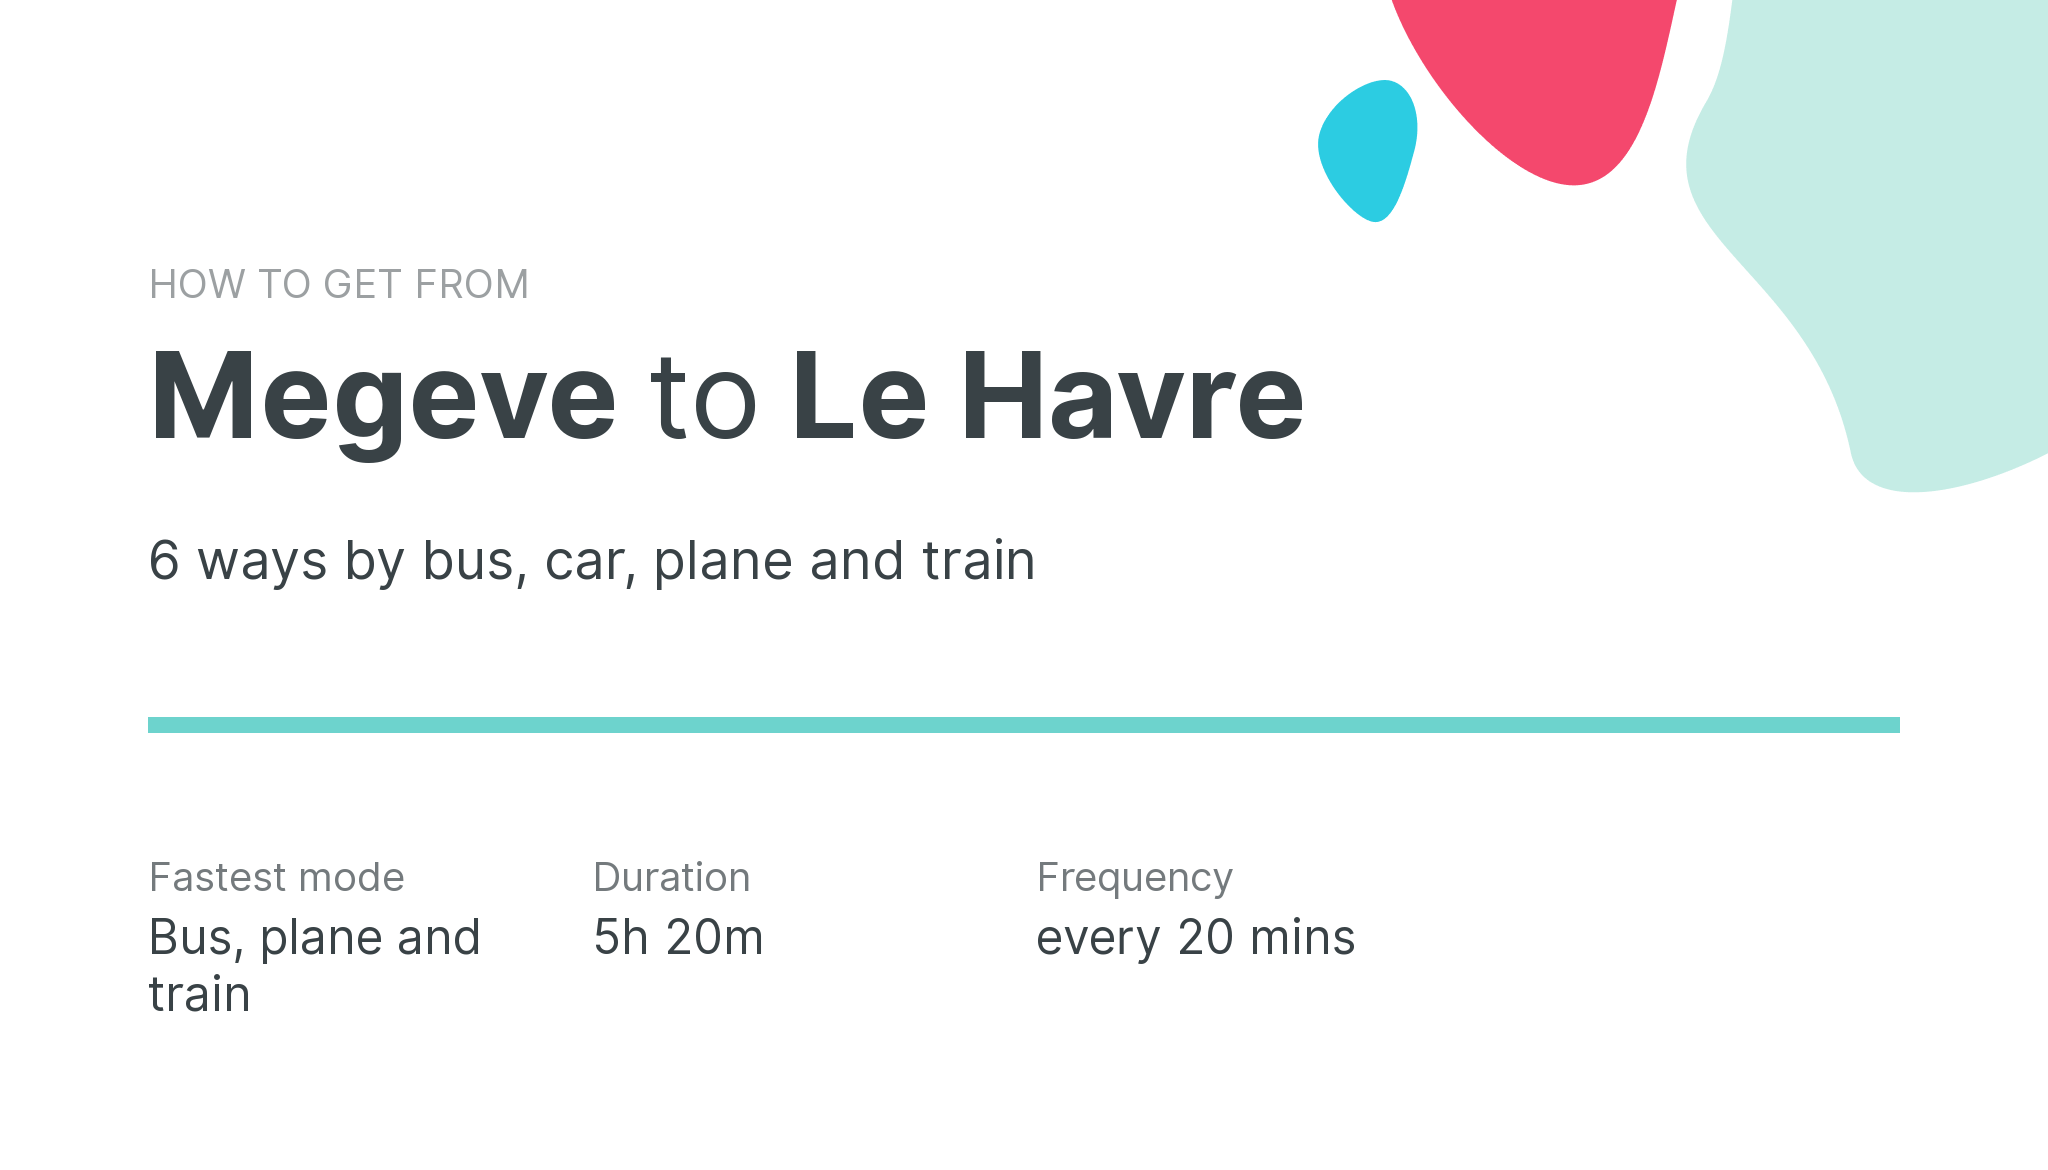 How do I get from Megeve to Le Havre